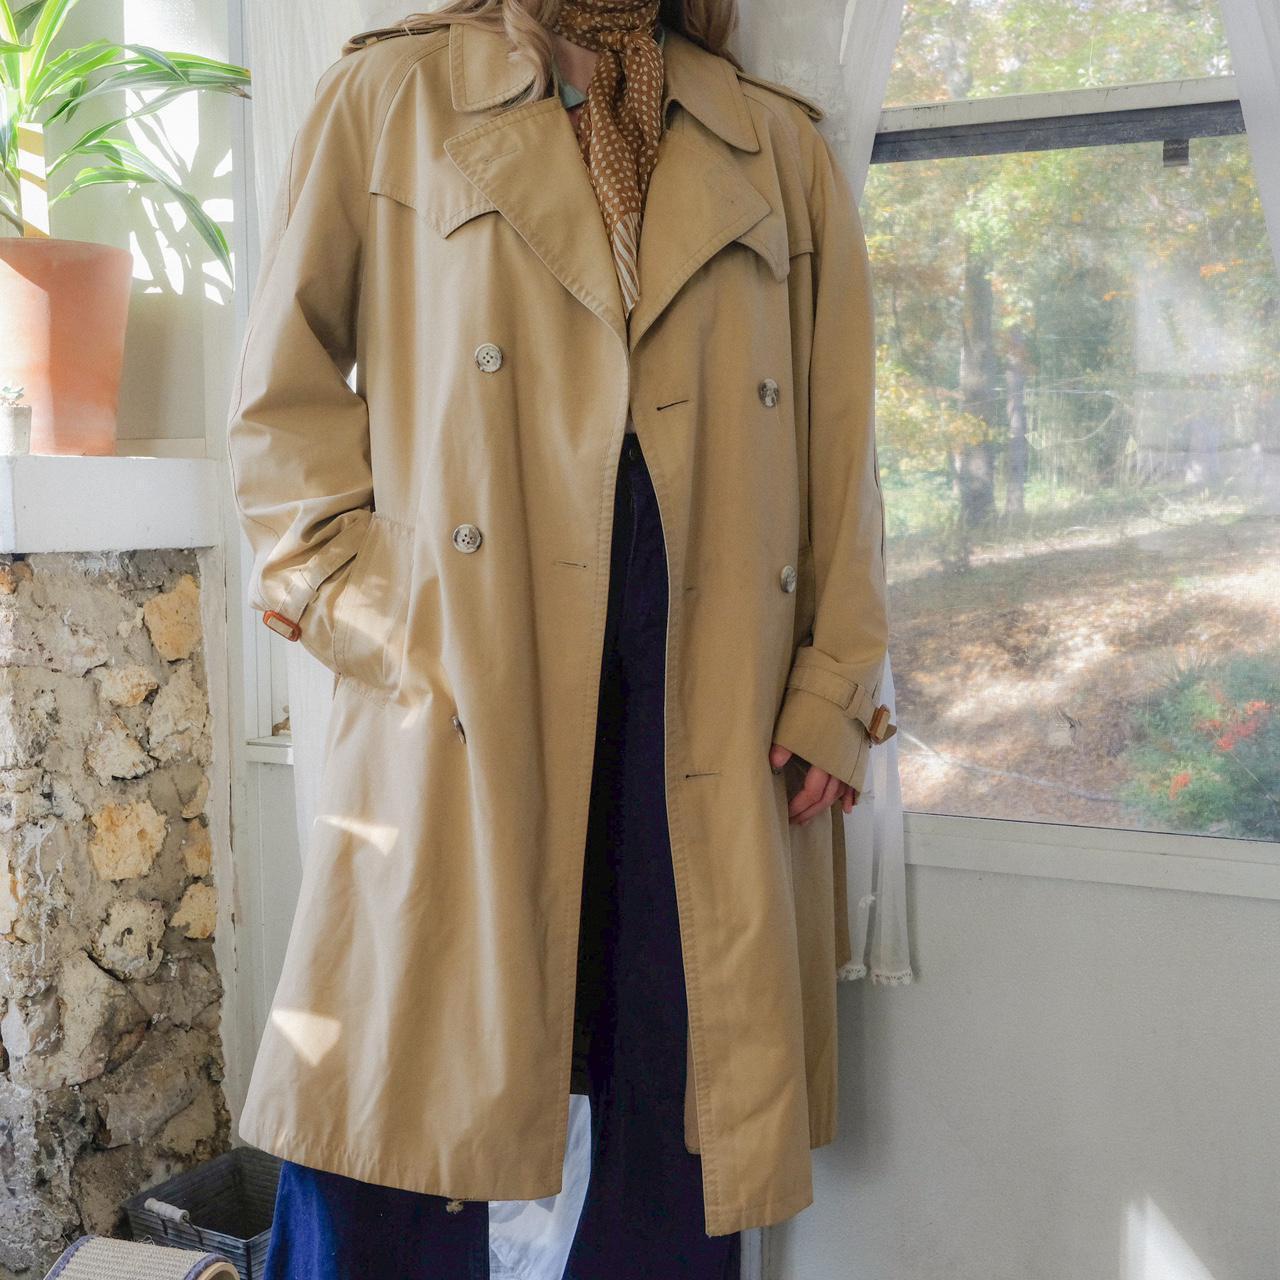 Product Image 1 - Vintage tan trench coat. Feels